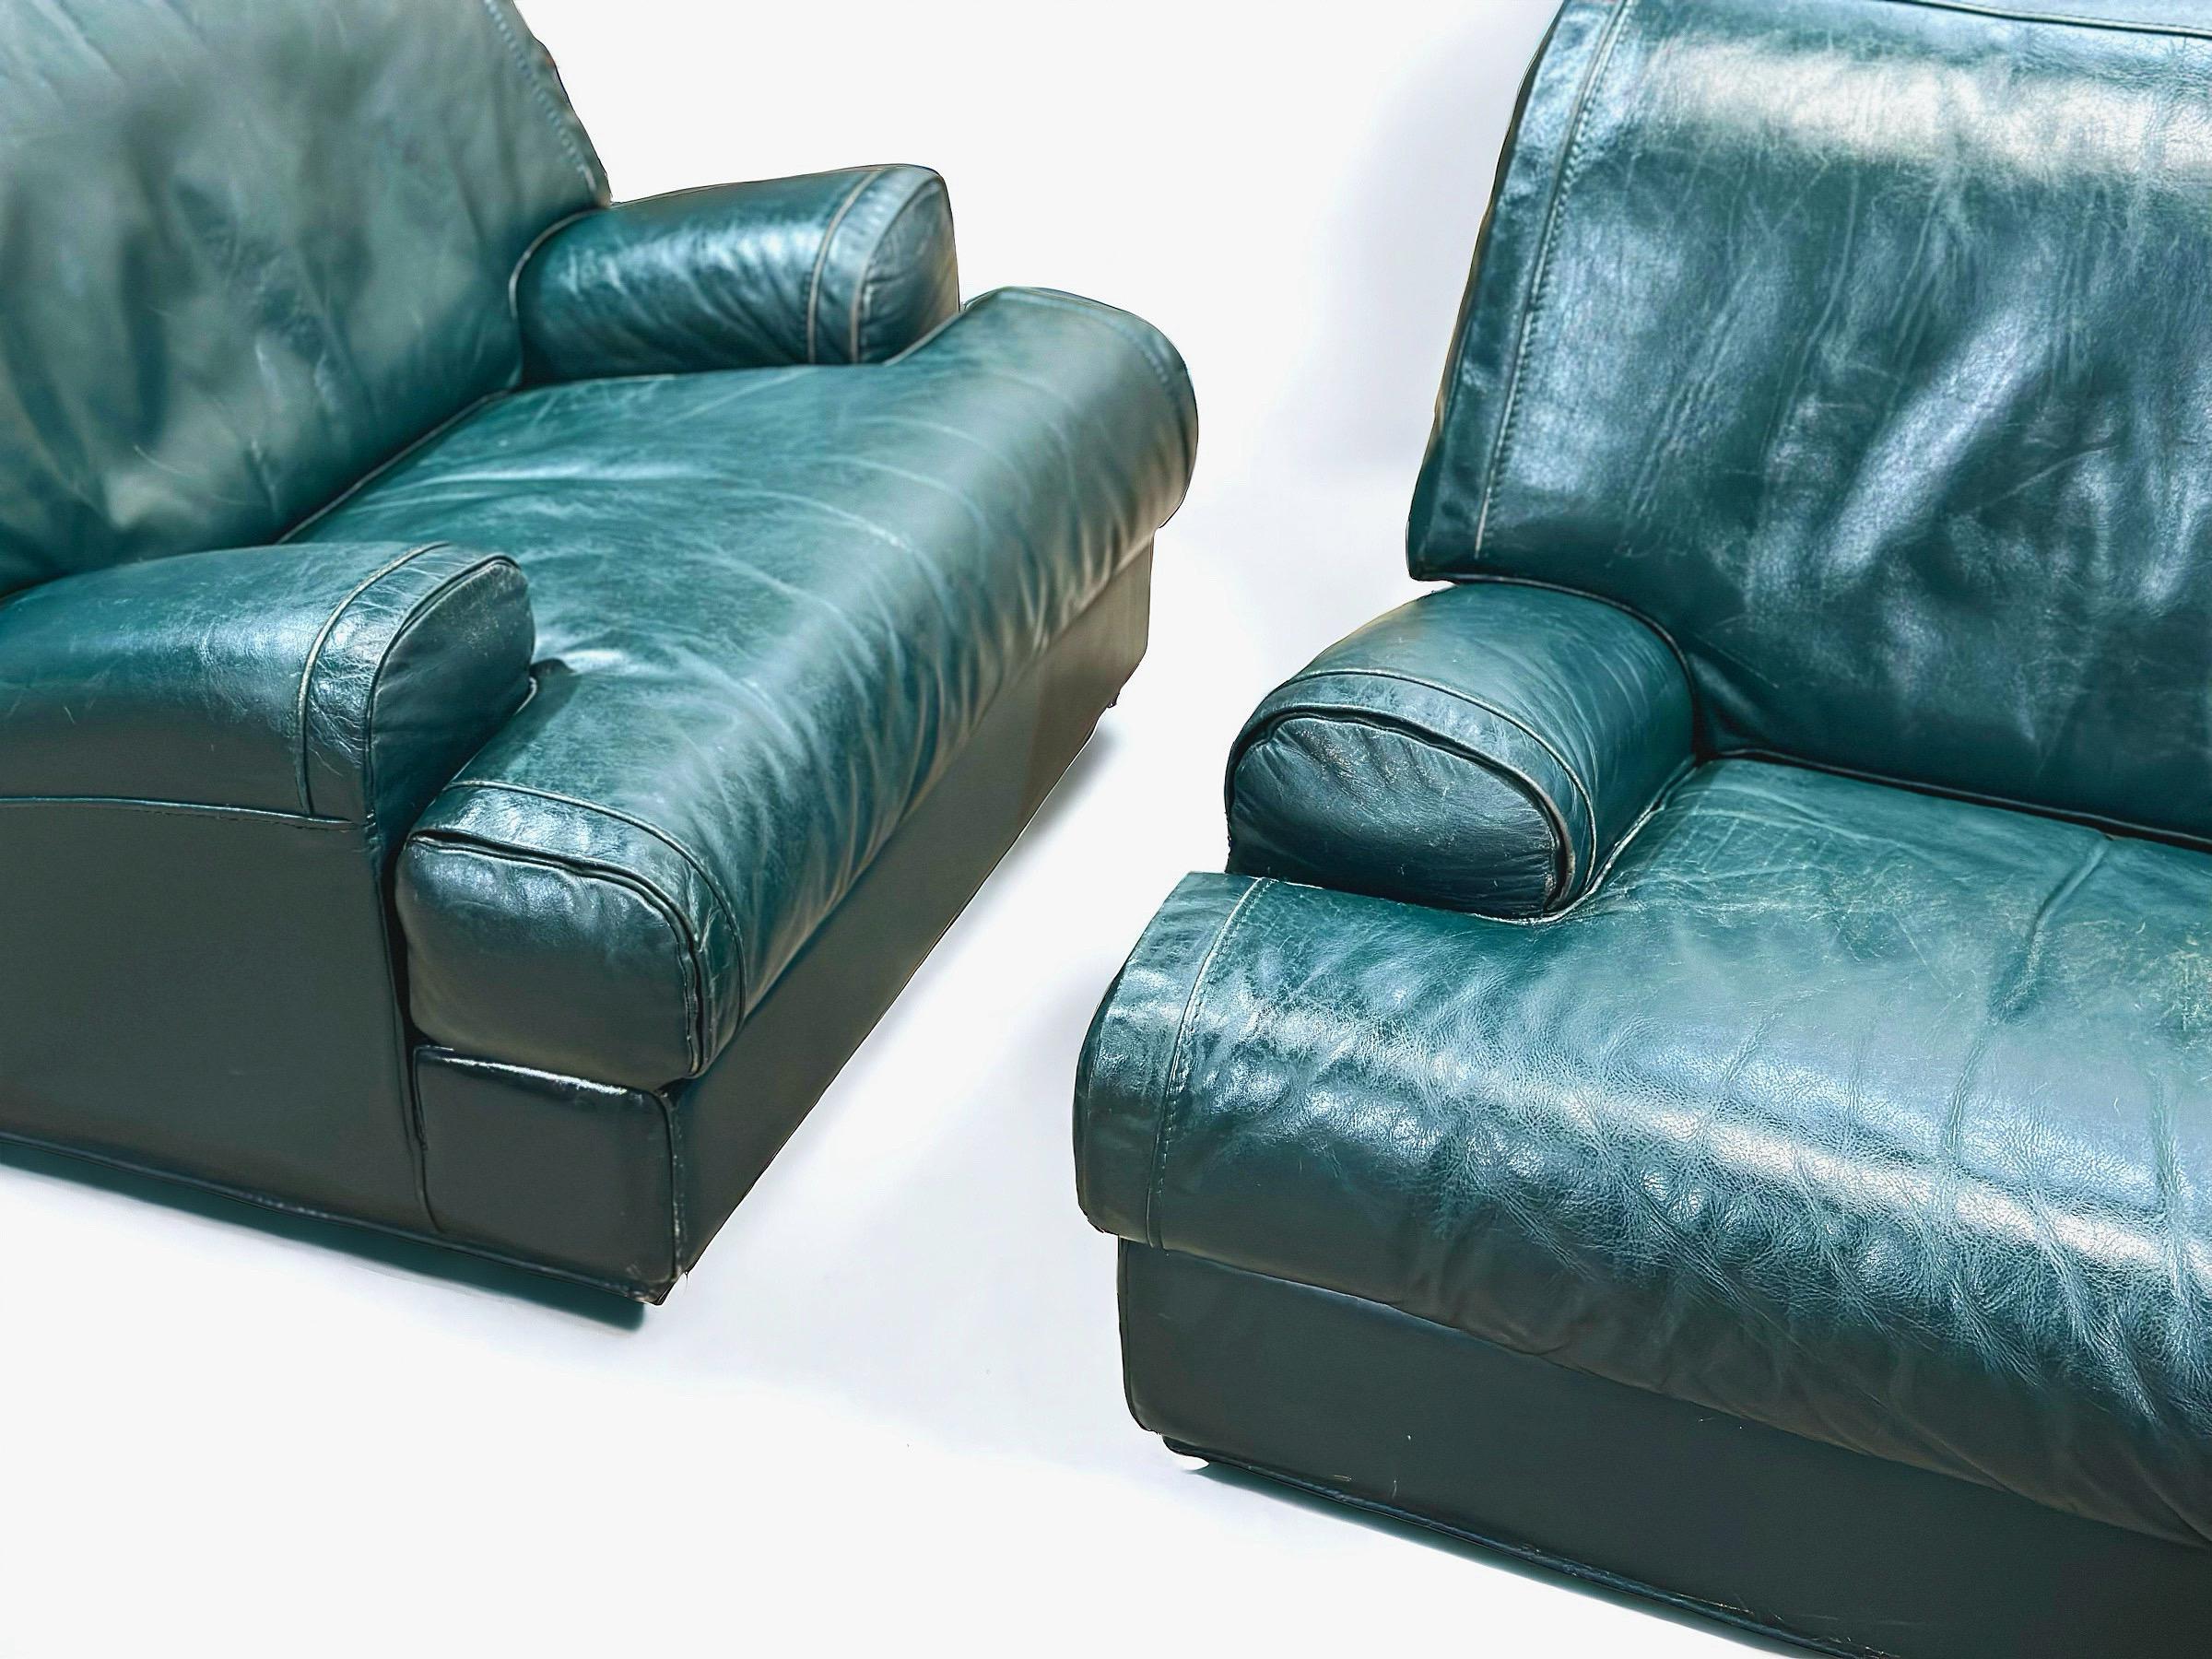 Exquisite pair of streamlined moderne or art deco style leather lounge chairs by Roche Bobois, France circa late 1970s. Striking silhouette and opulent comfort. The full grain teal leather has aged to perfection. These chairs are unique on the world